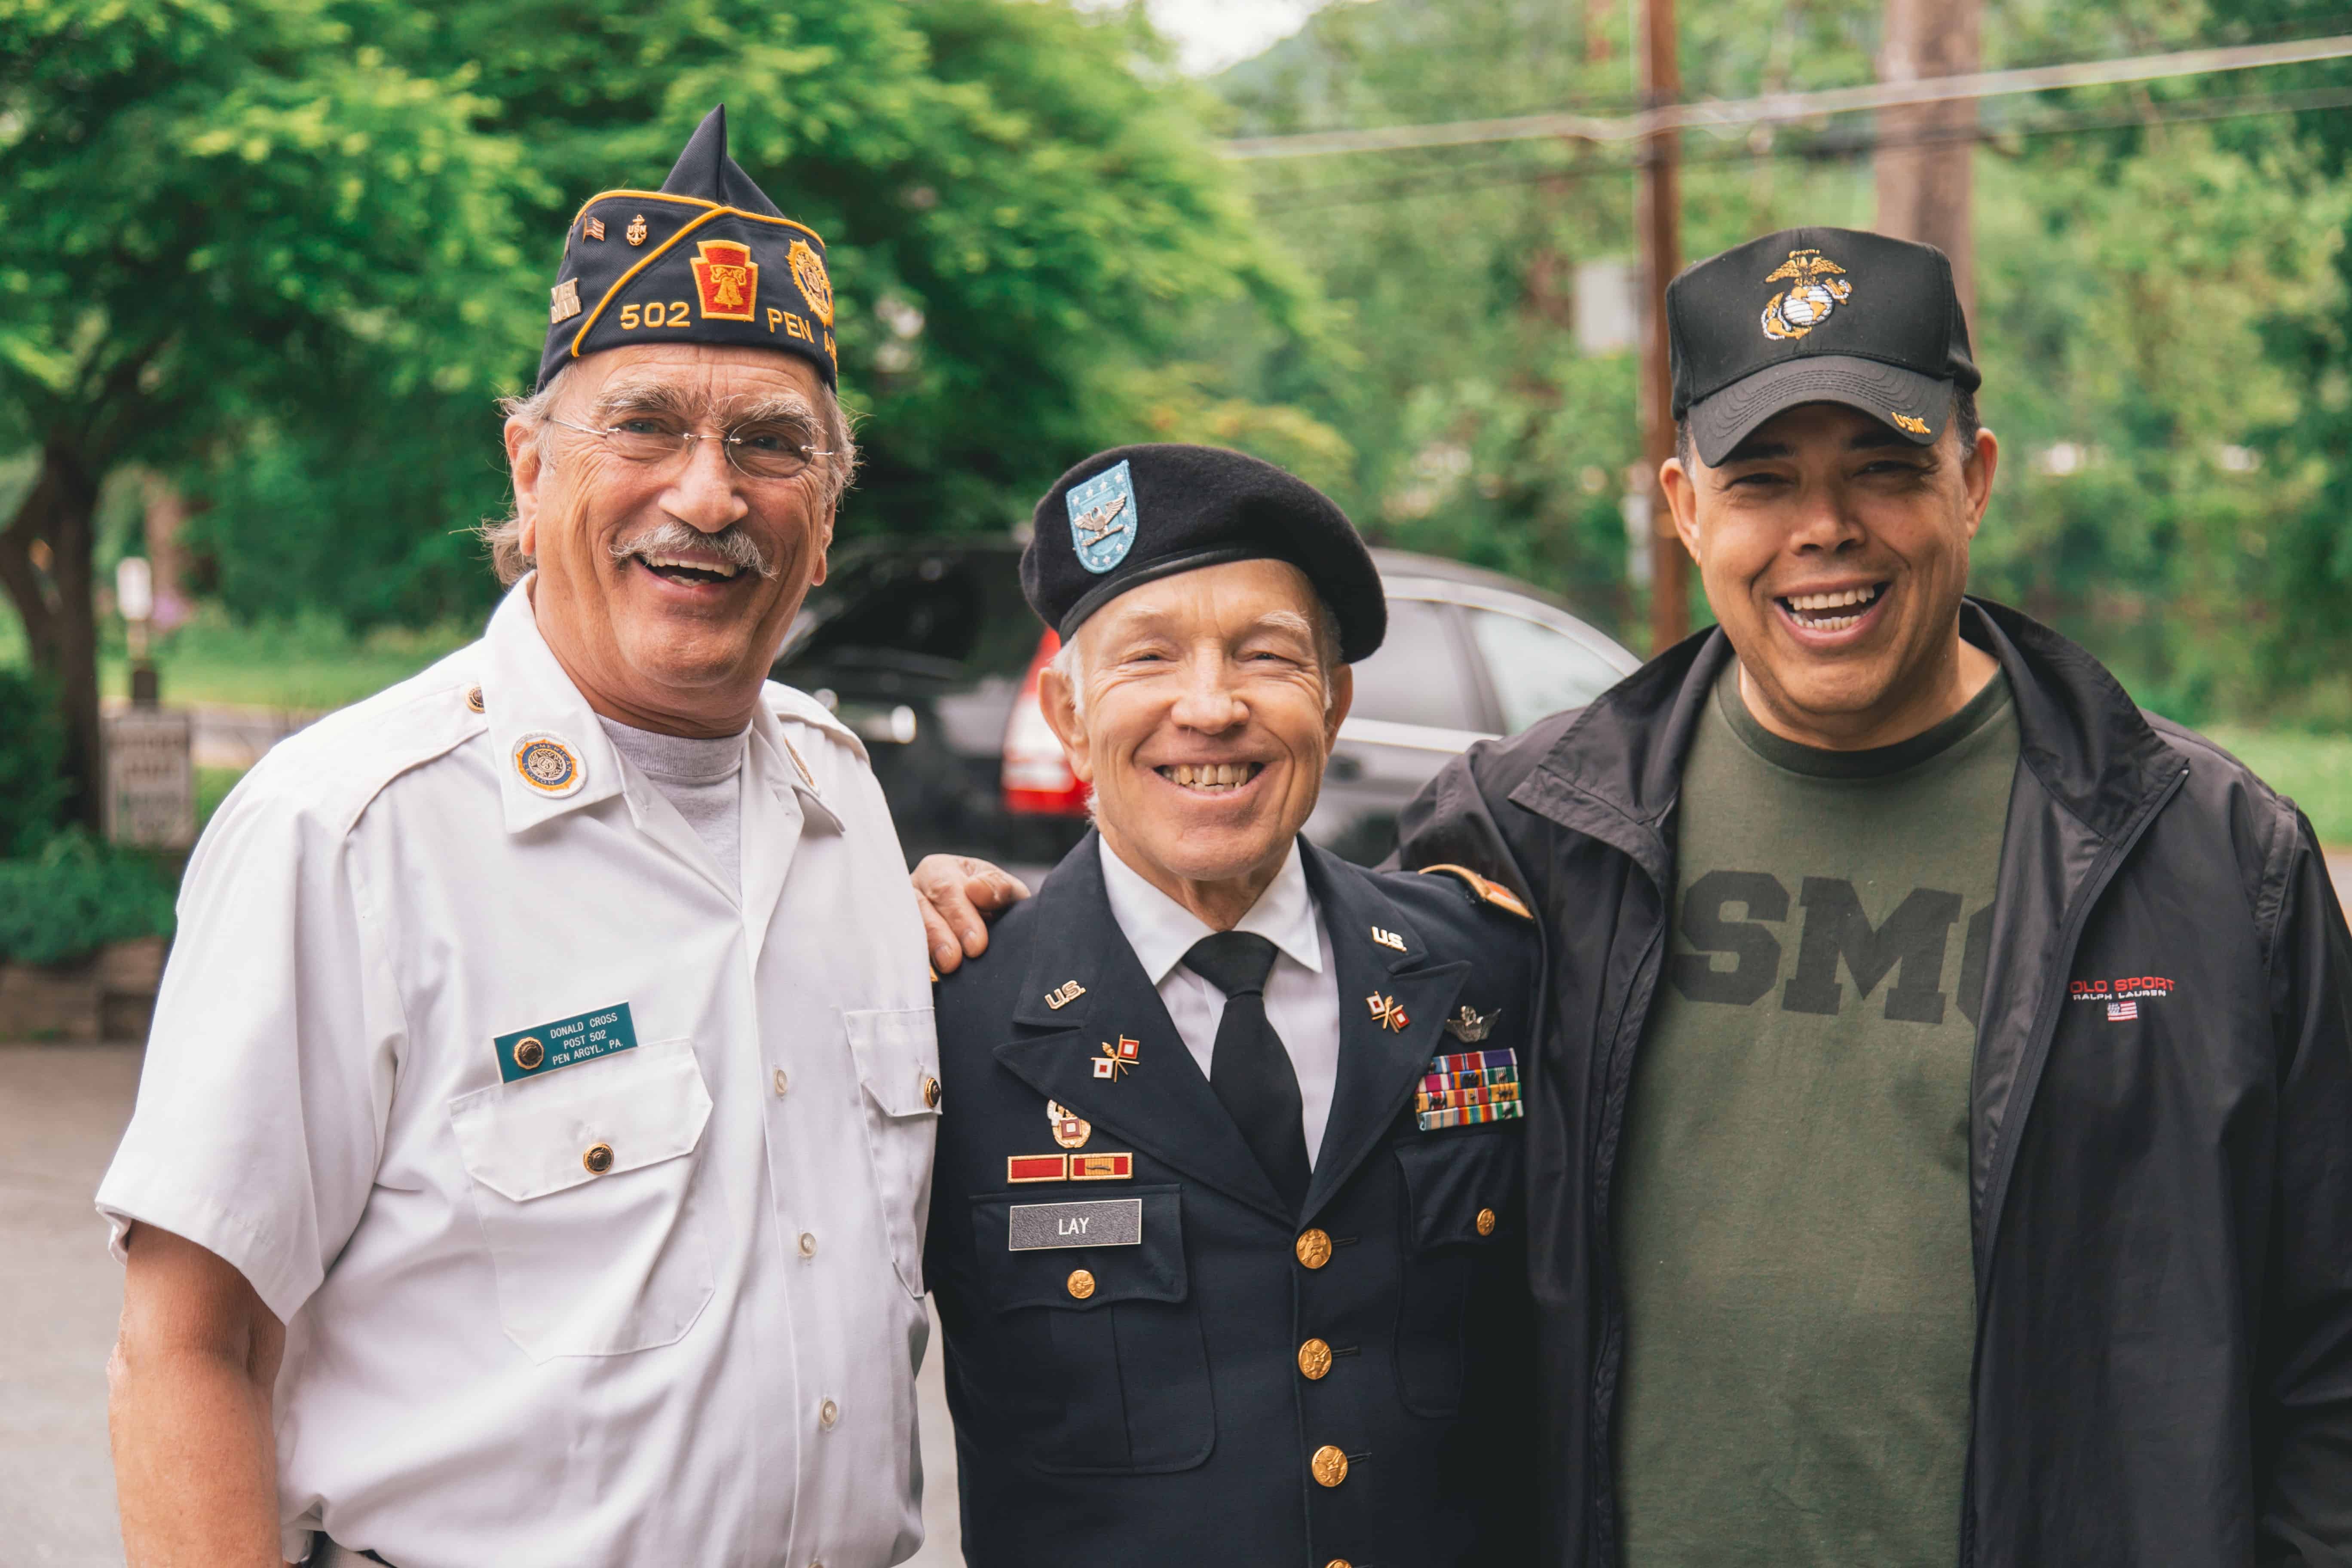 U.S. veterans from multiple generations smiling together